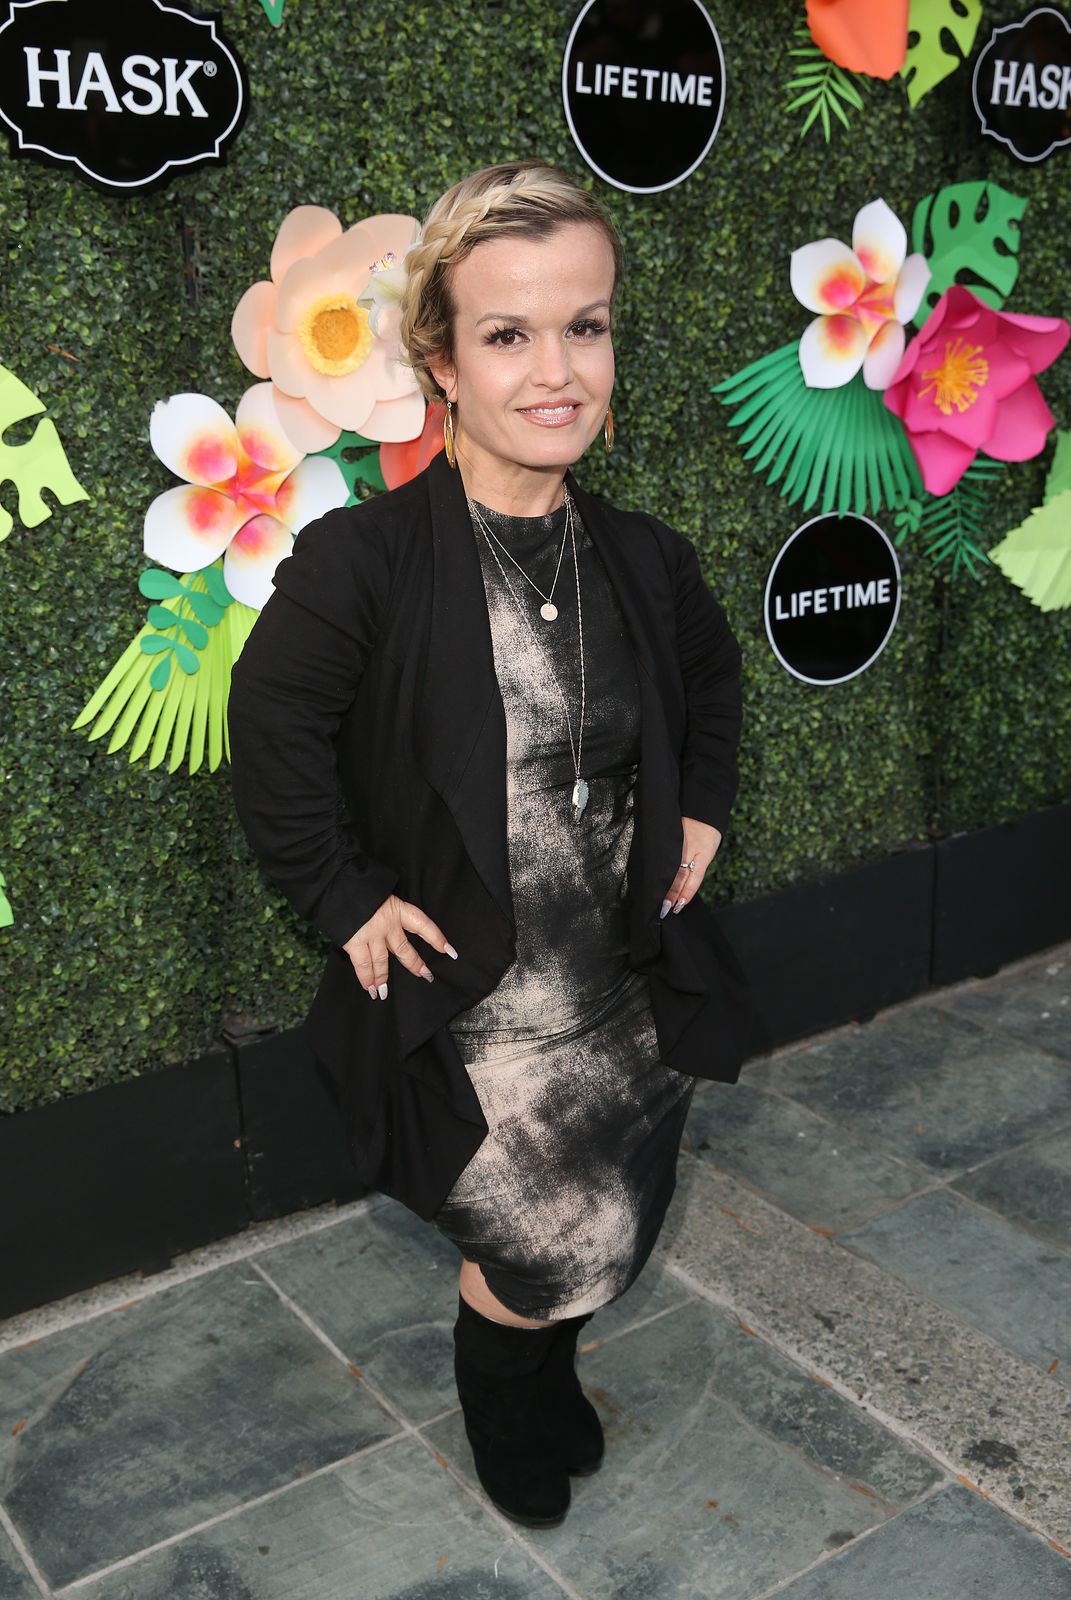 Terra Jole at the Lifetime Summer Luau on May 20, 2019, in Los Angeles, California | Photo: Jesse Grant/Getty Images